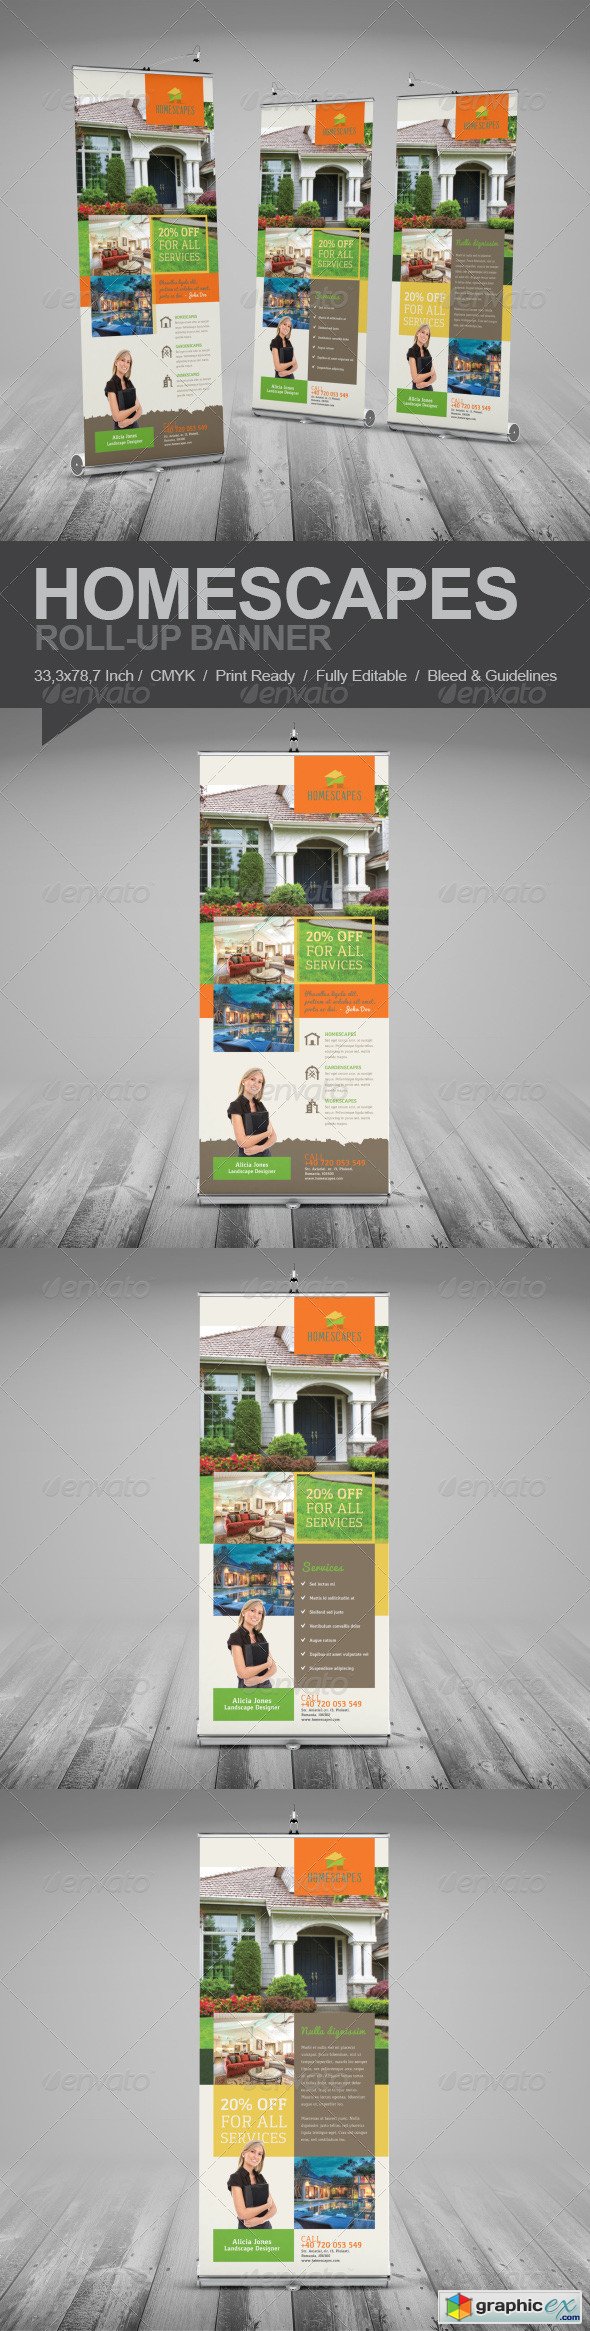 Real Estate And Homescapes Roll-Up Banner